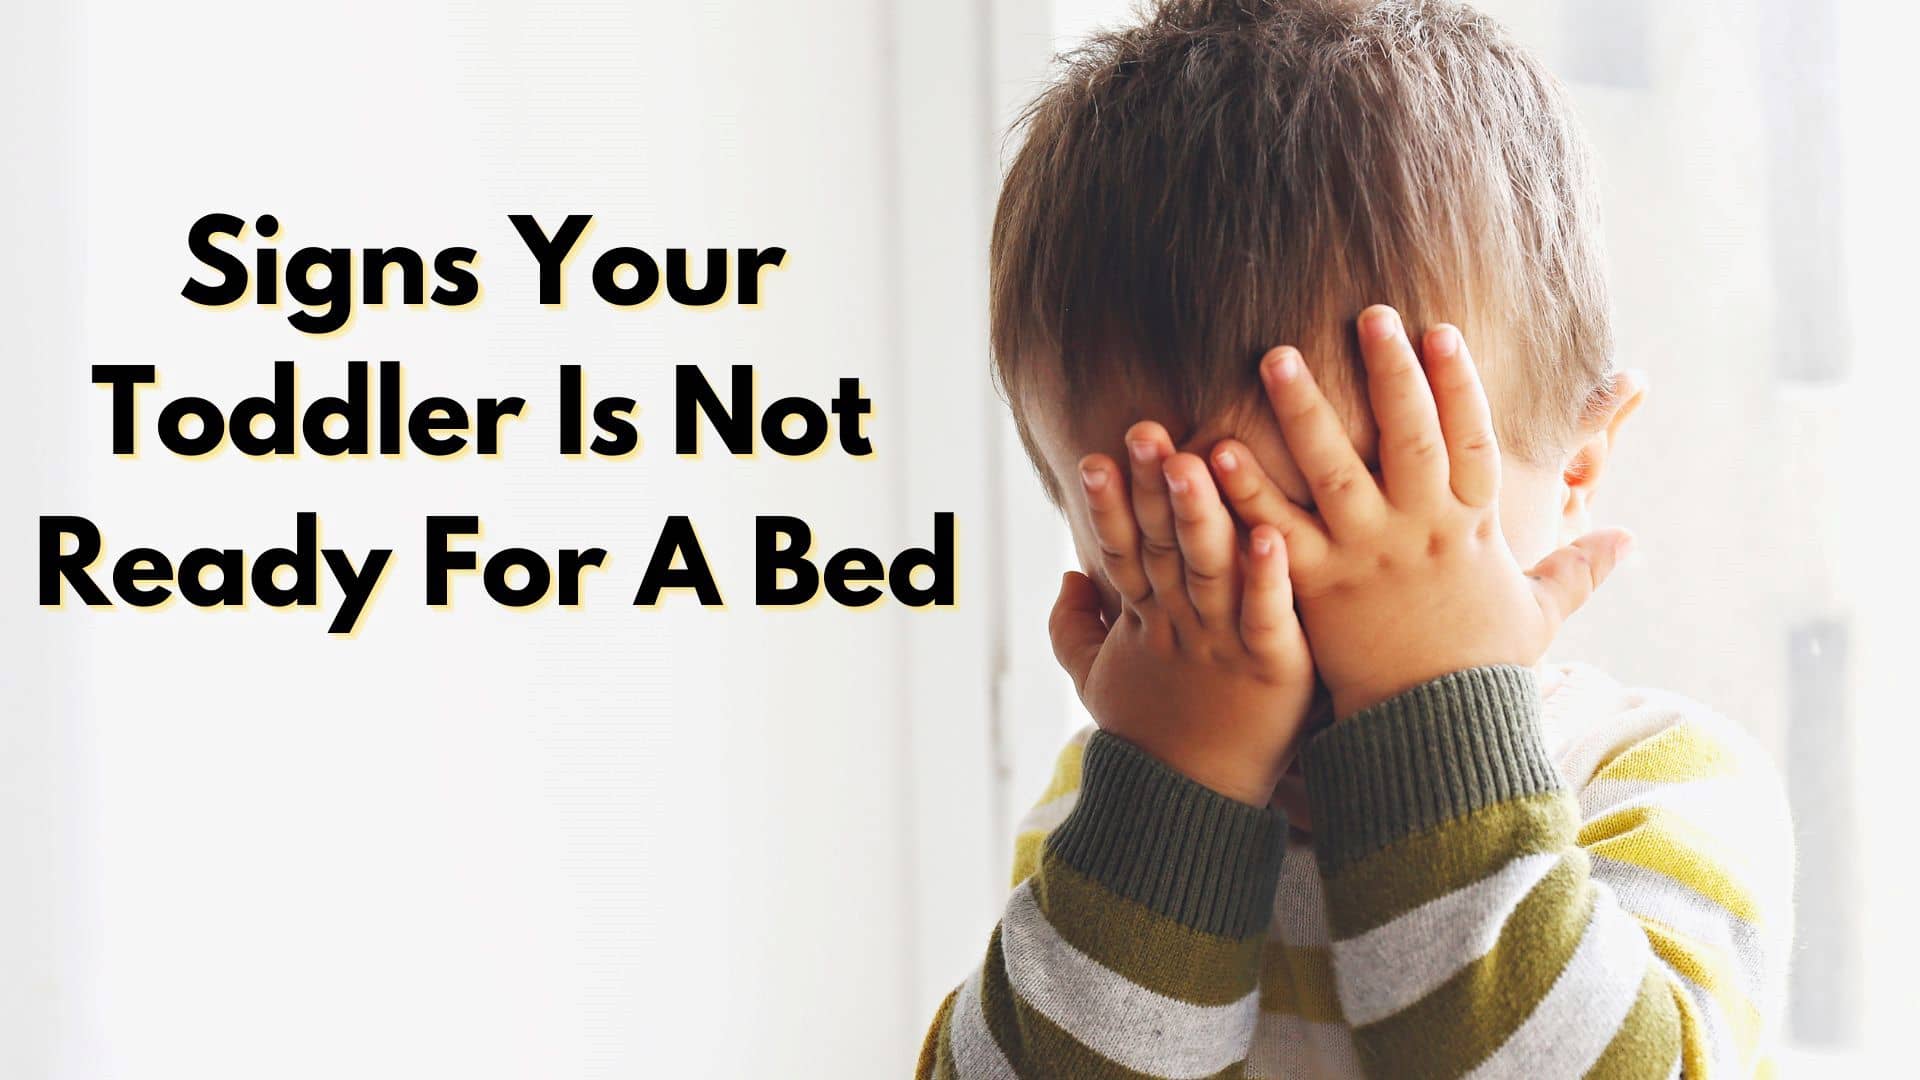 Signs Your Toddler Is Not Ready For A Bed?